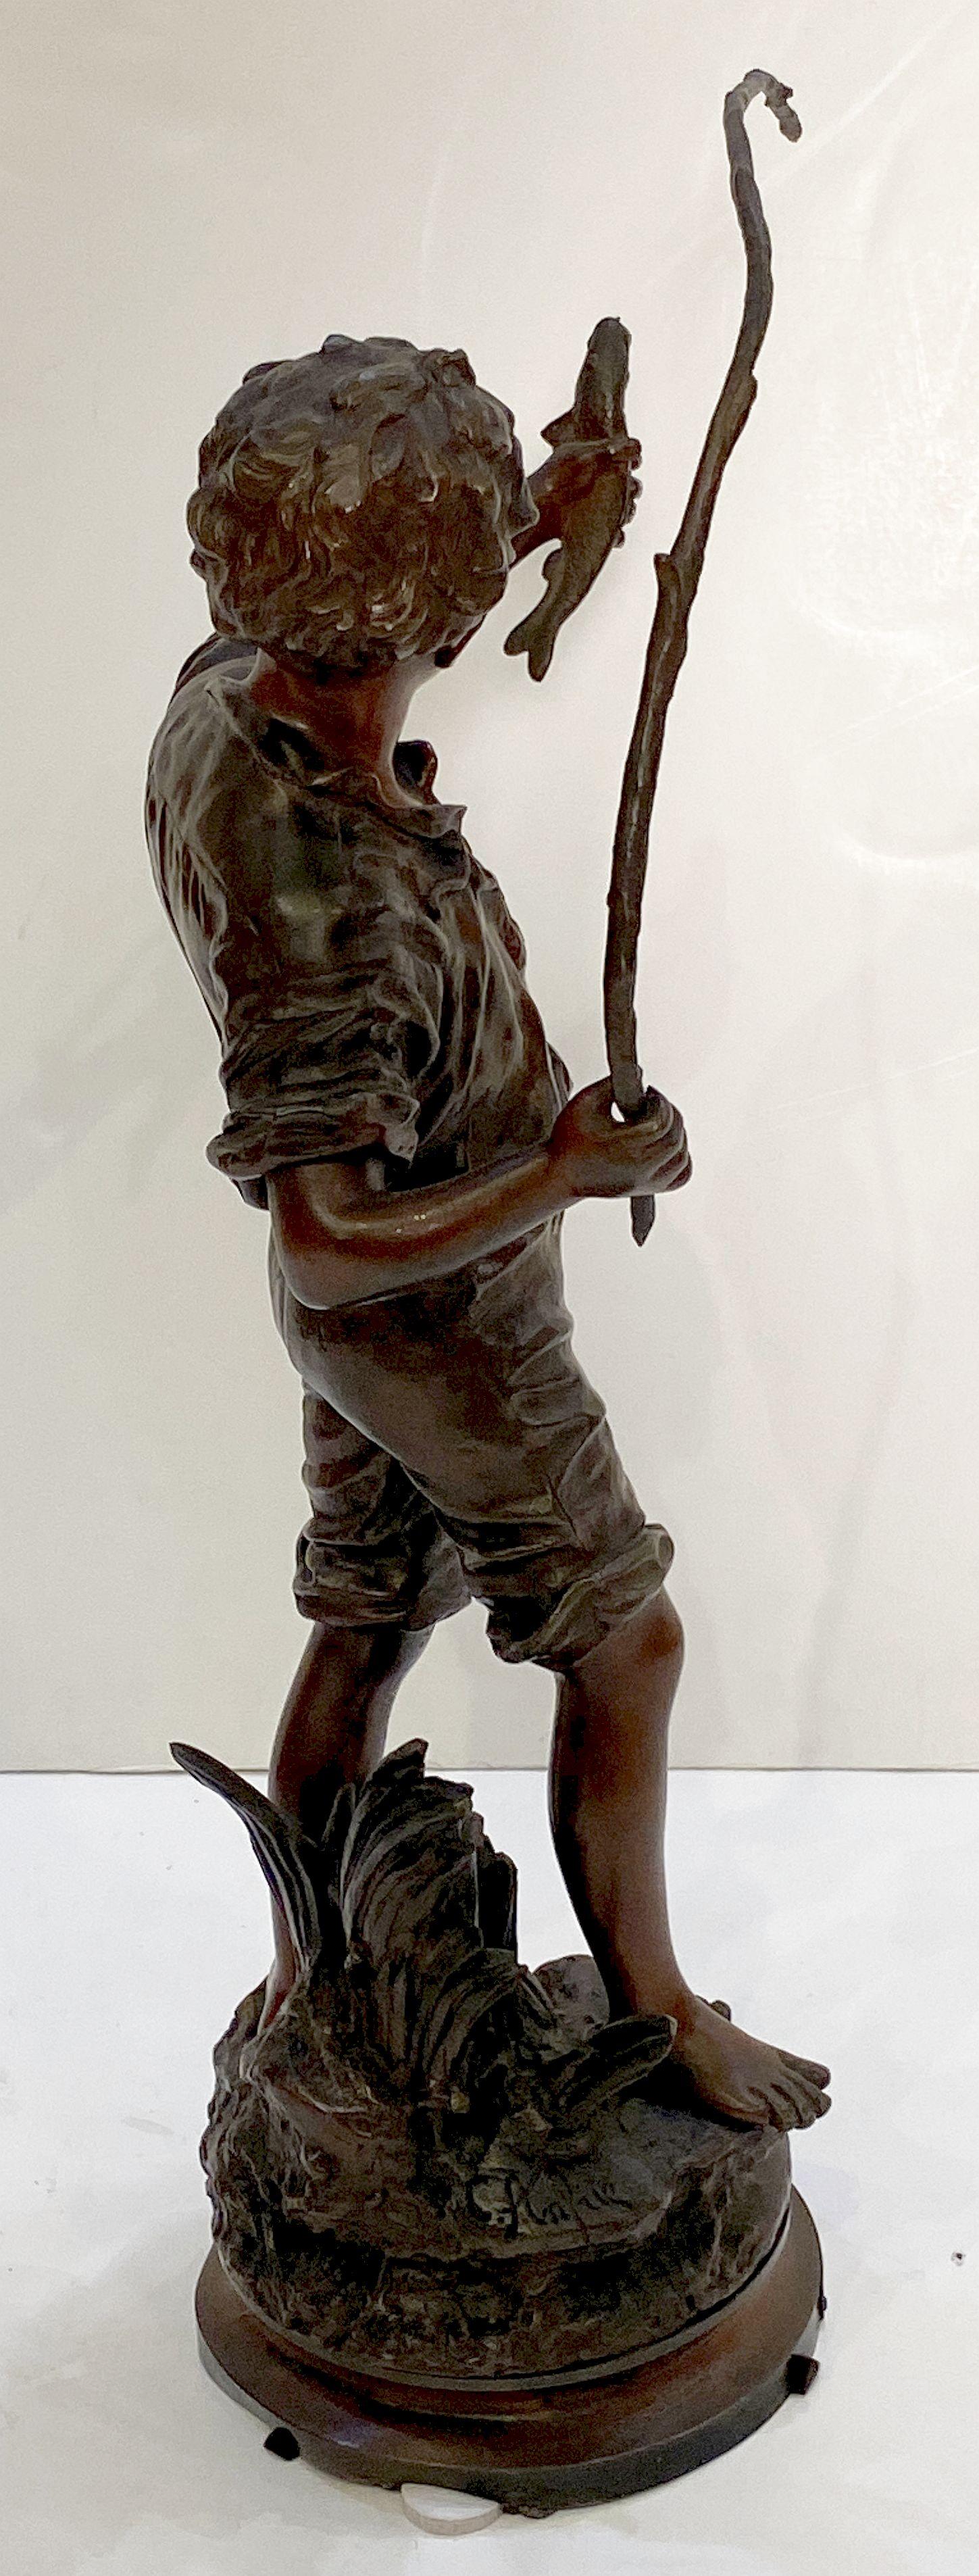 Heureux Pêcheur or Happy Fisherboy Bronze Sculptural Figure by Charles Anfrie  9